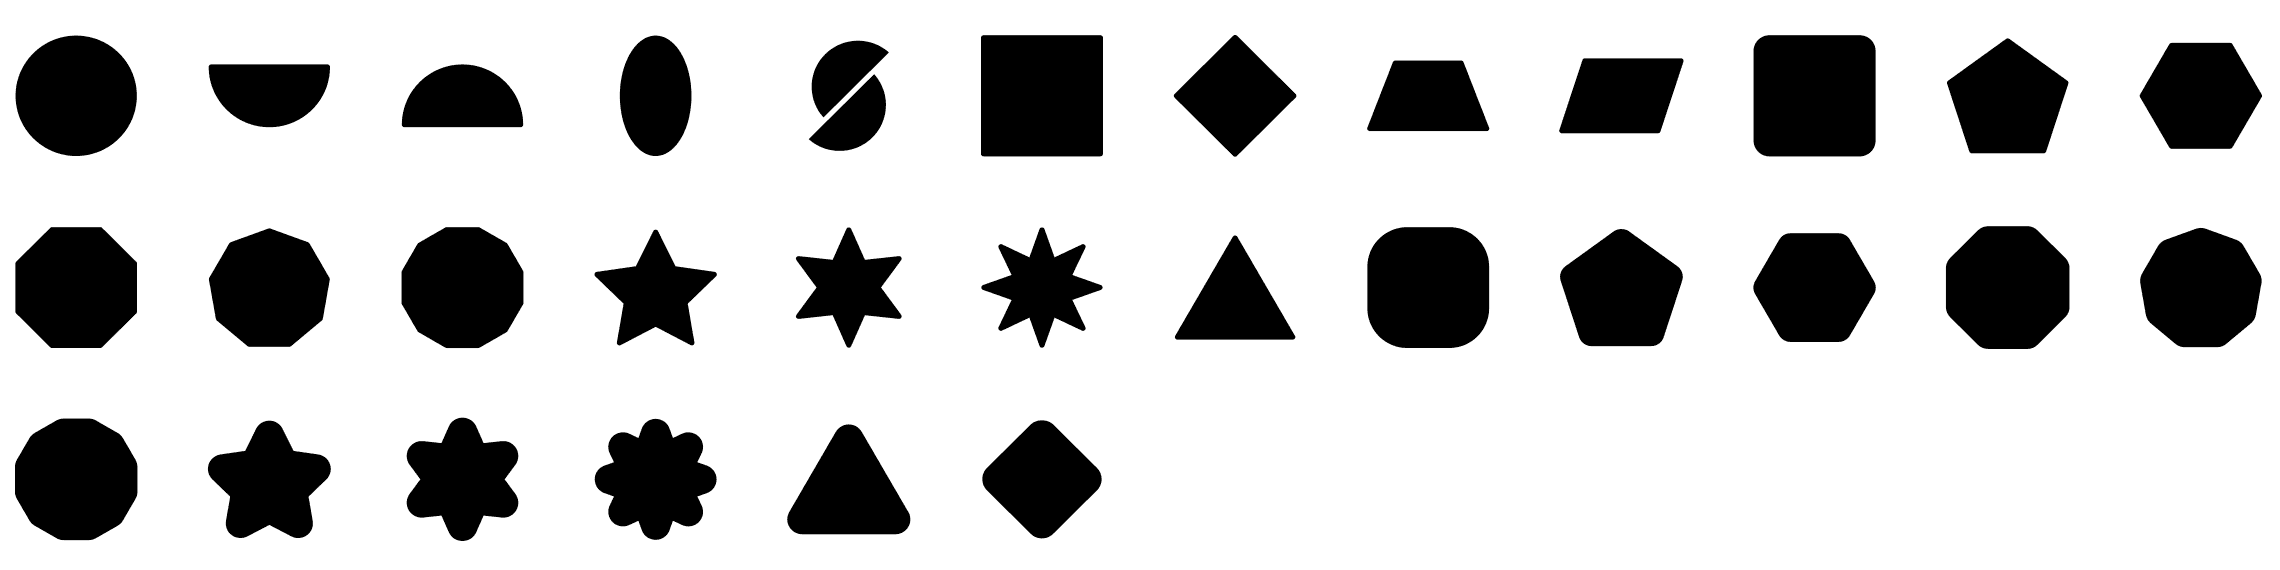 shapes-glyph-icons-preview